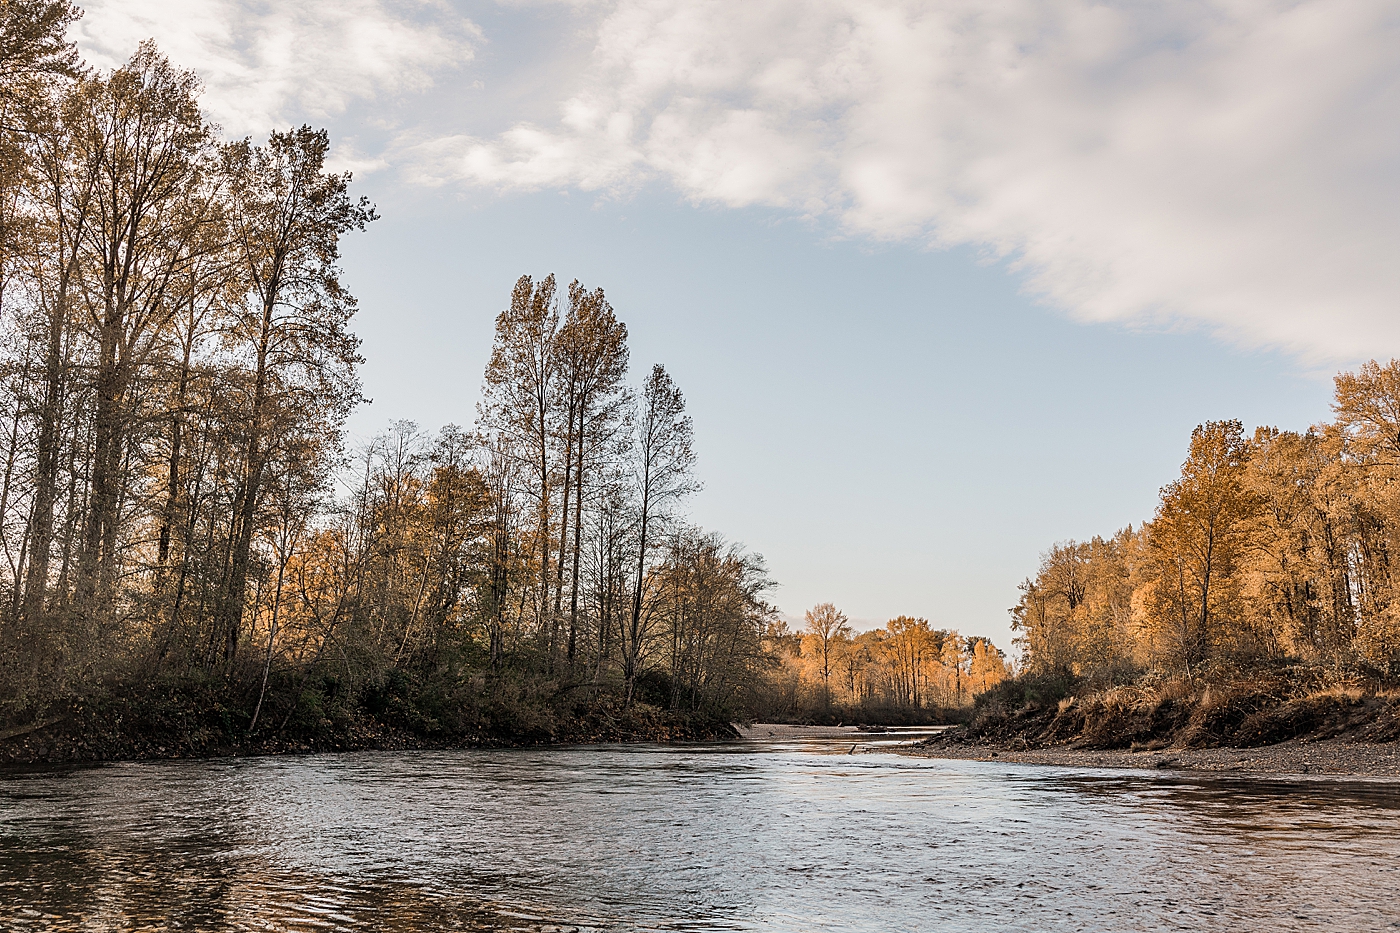 Snoqualmie River in the fall. Photo by Megan Montalvo Photography.